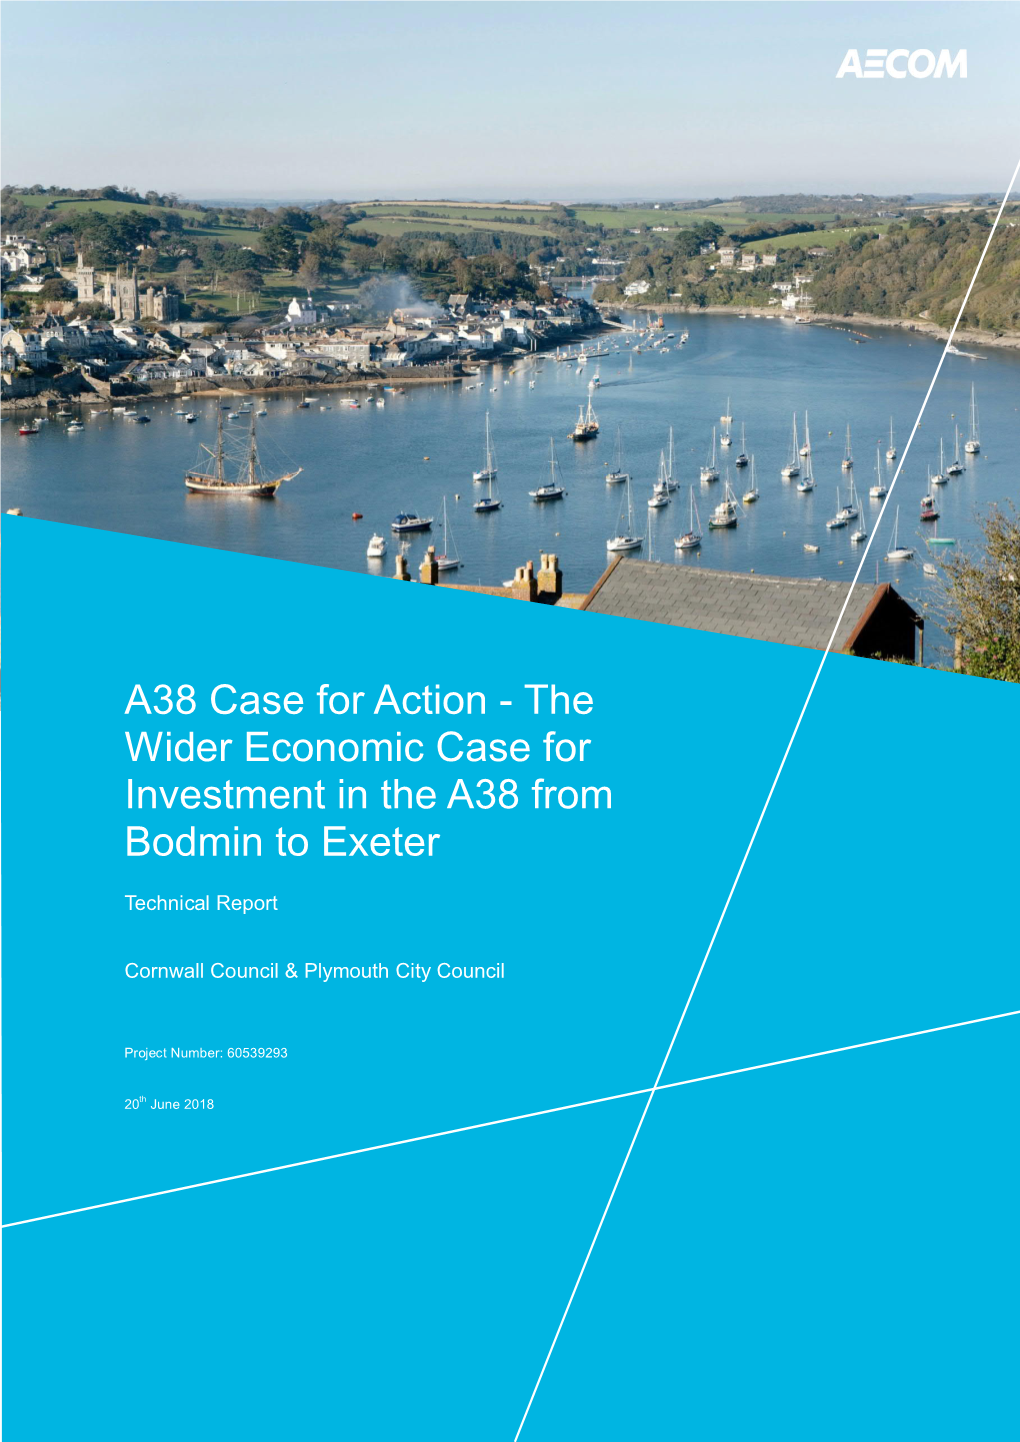 A38 Case for Action - the Wider Economic Case for Investment in the A38 from Bodmin to Exeter